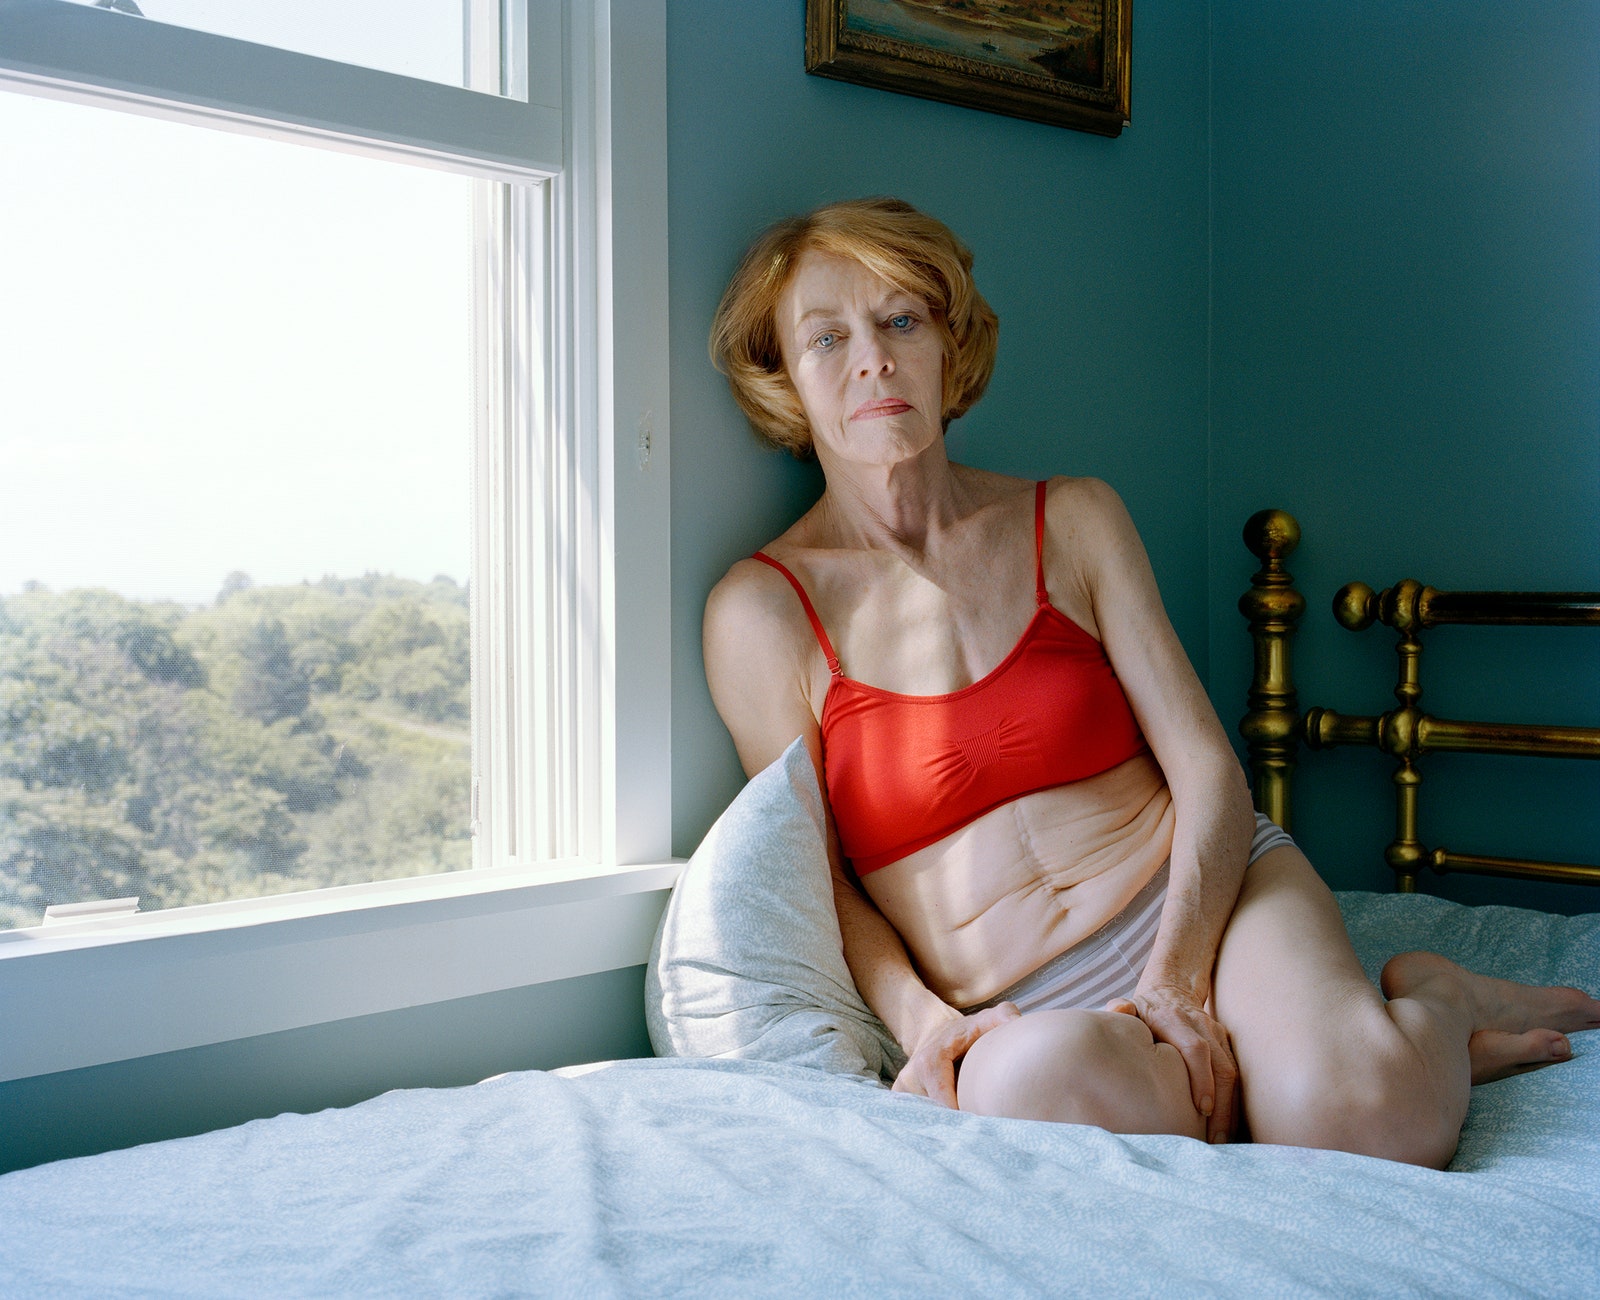 chris tack recommends Images Of Nude Older Women